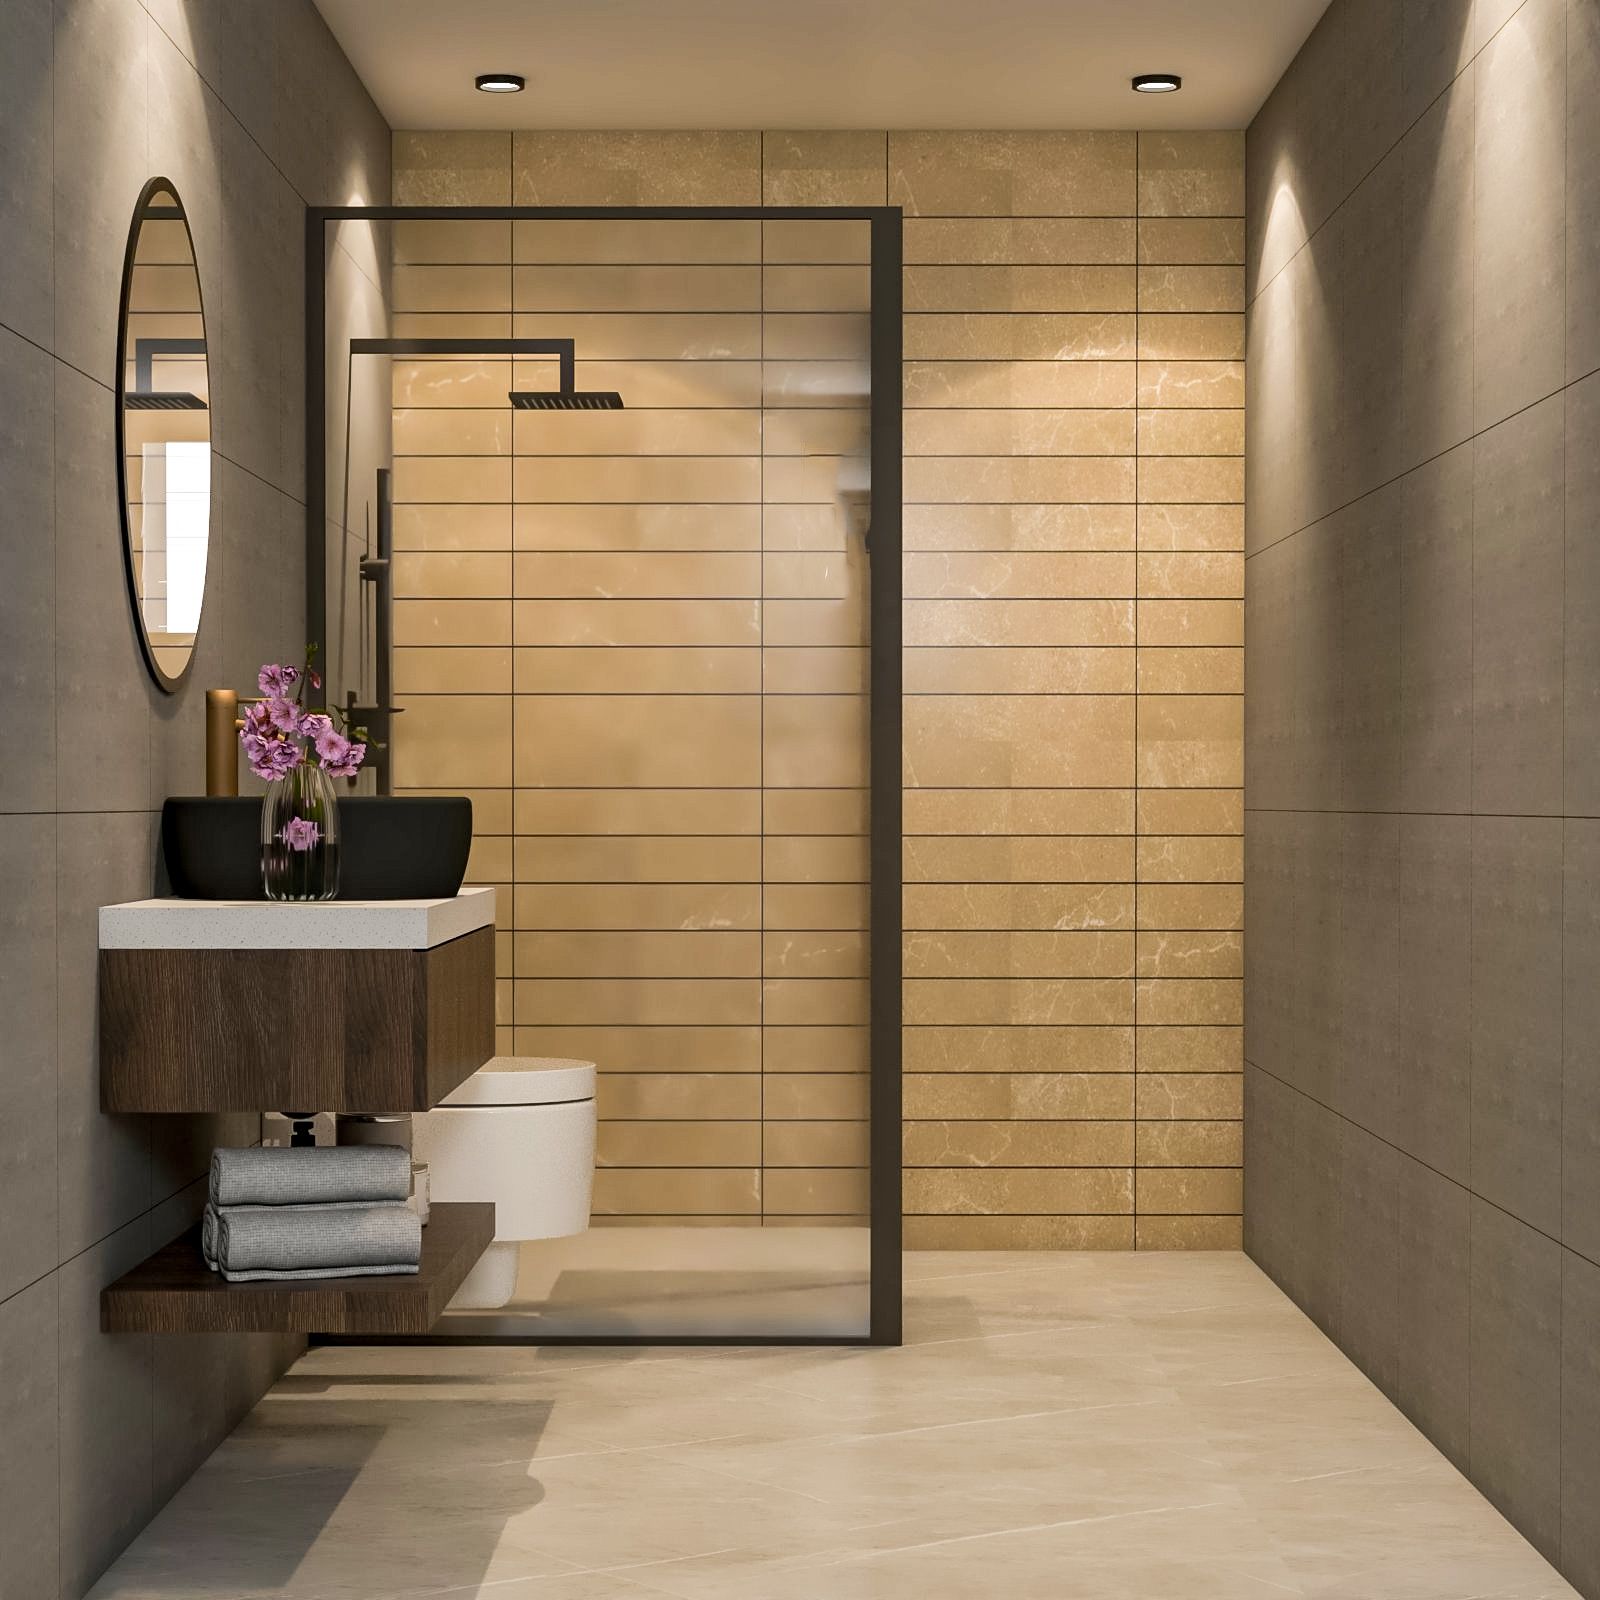 Contemporary Grey And Brown Bathroom Design With Suede Finish Unit